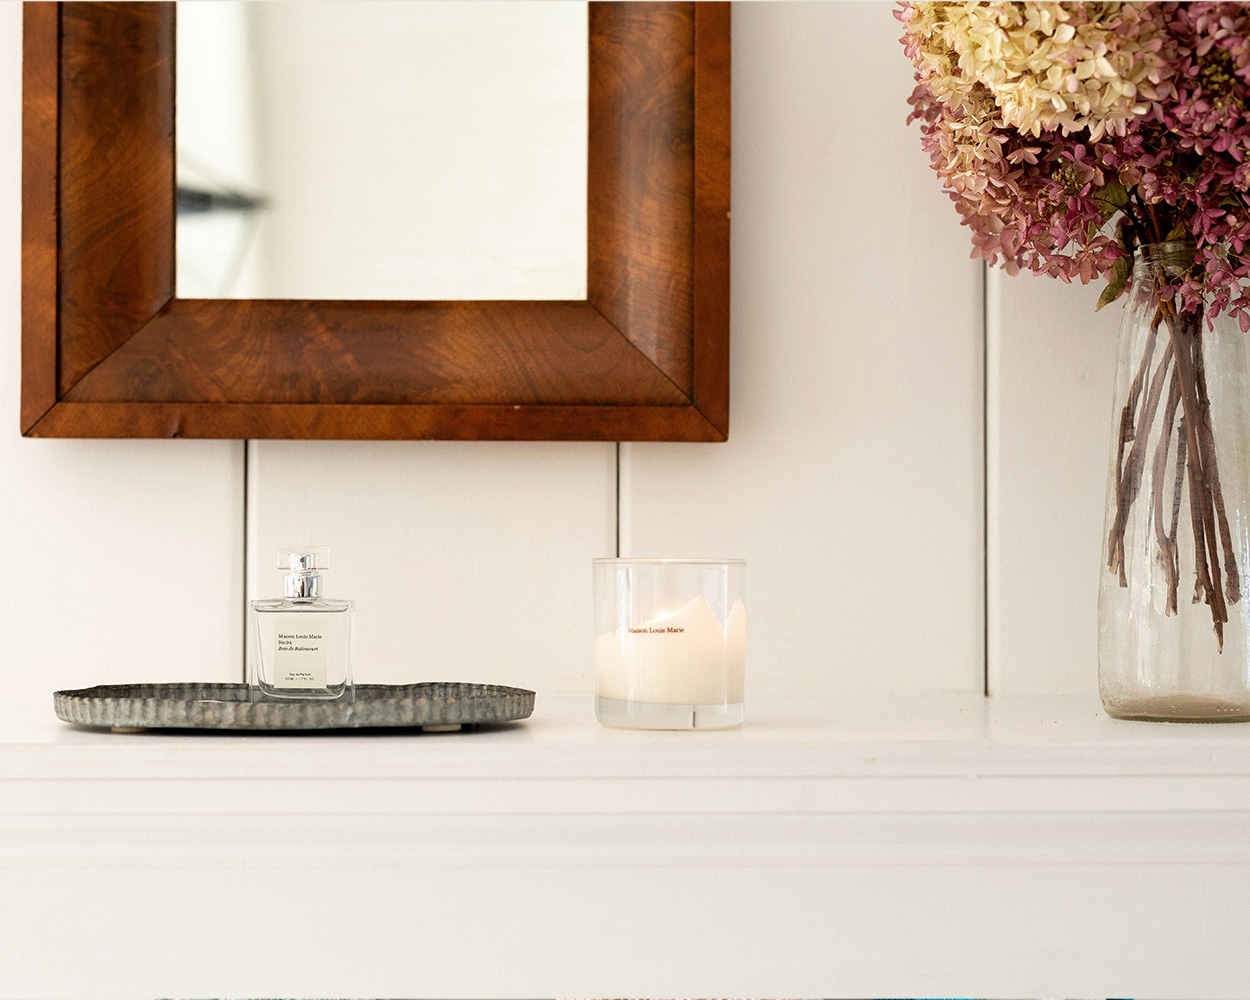 Wooden framed mirror hung on a wall above a shelf with a metal tray, perfume bottle, candle, and vase with flowers inside.